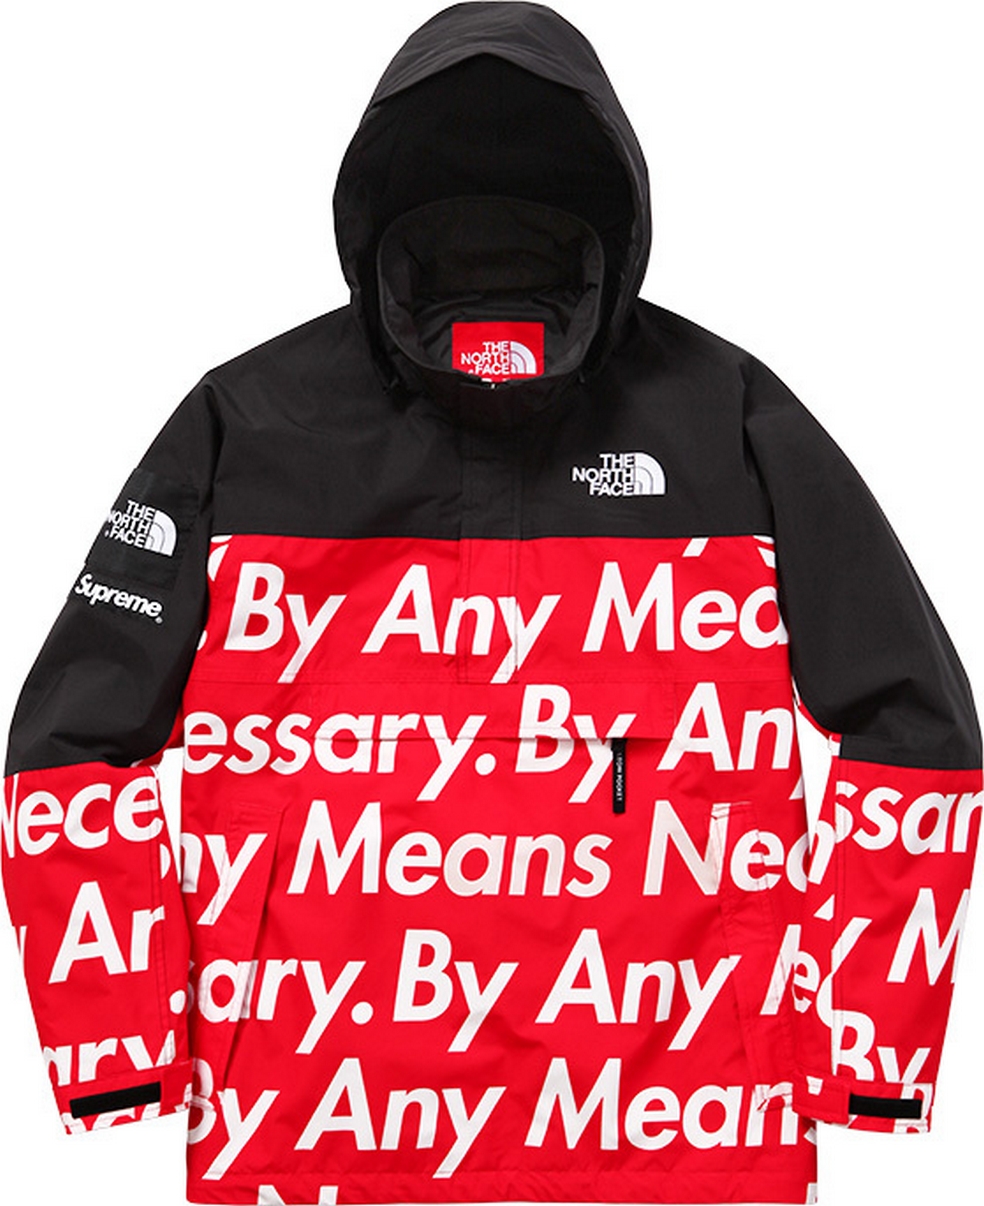 Supreme x The North Face "By Any Means Necessary" Drops ...